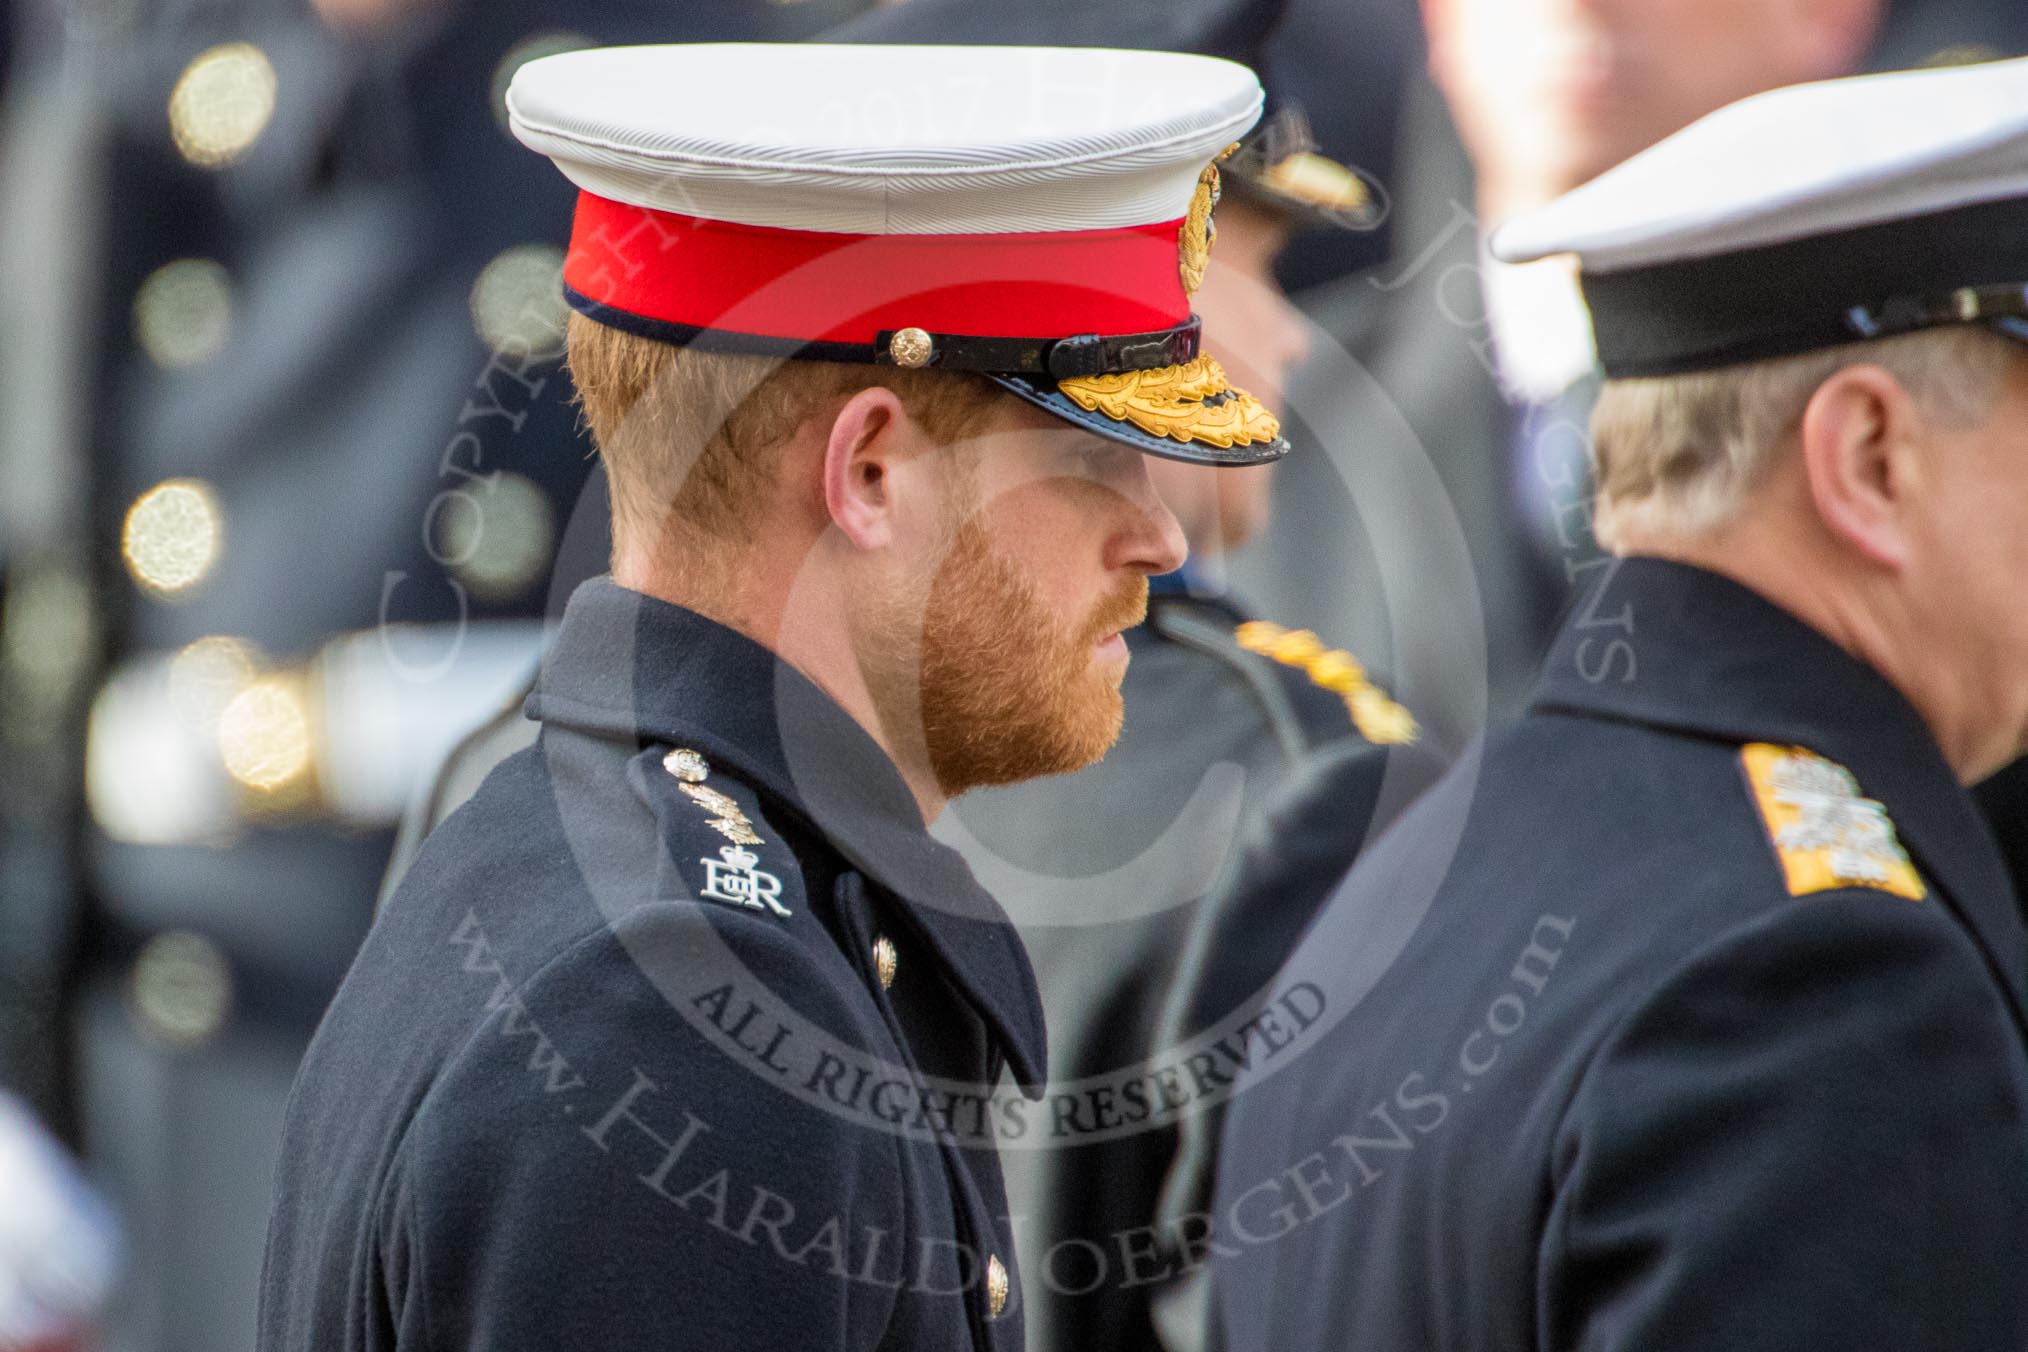 HRH The Duke of Sussex (Prince Harry) after leying a wreath during the Remembrance Sunday Cenotaph Ceremony 2018 at Horse Guards Parade, Westminster, London, 11 November 2018, 11:06.